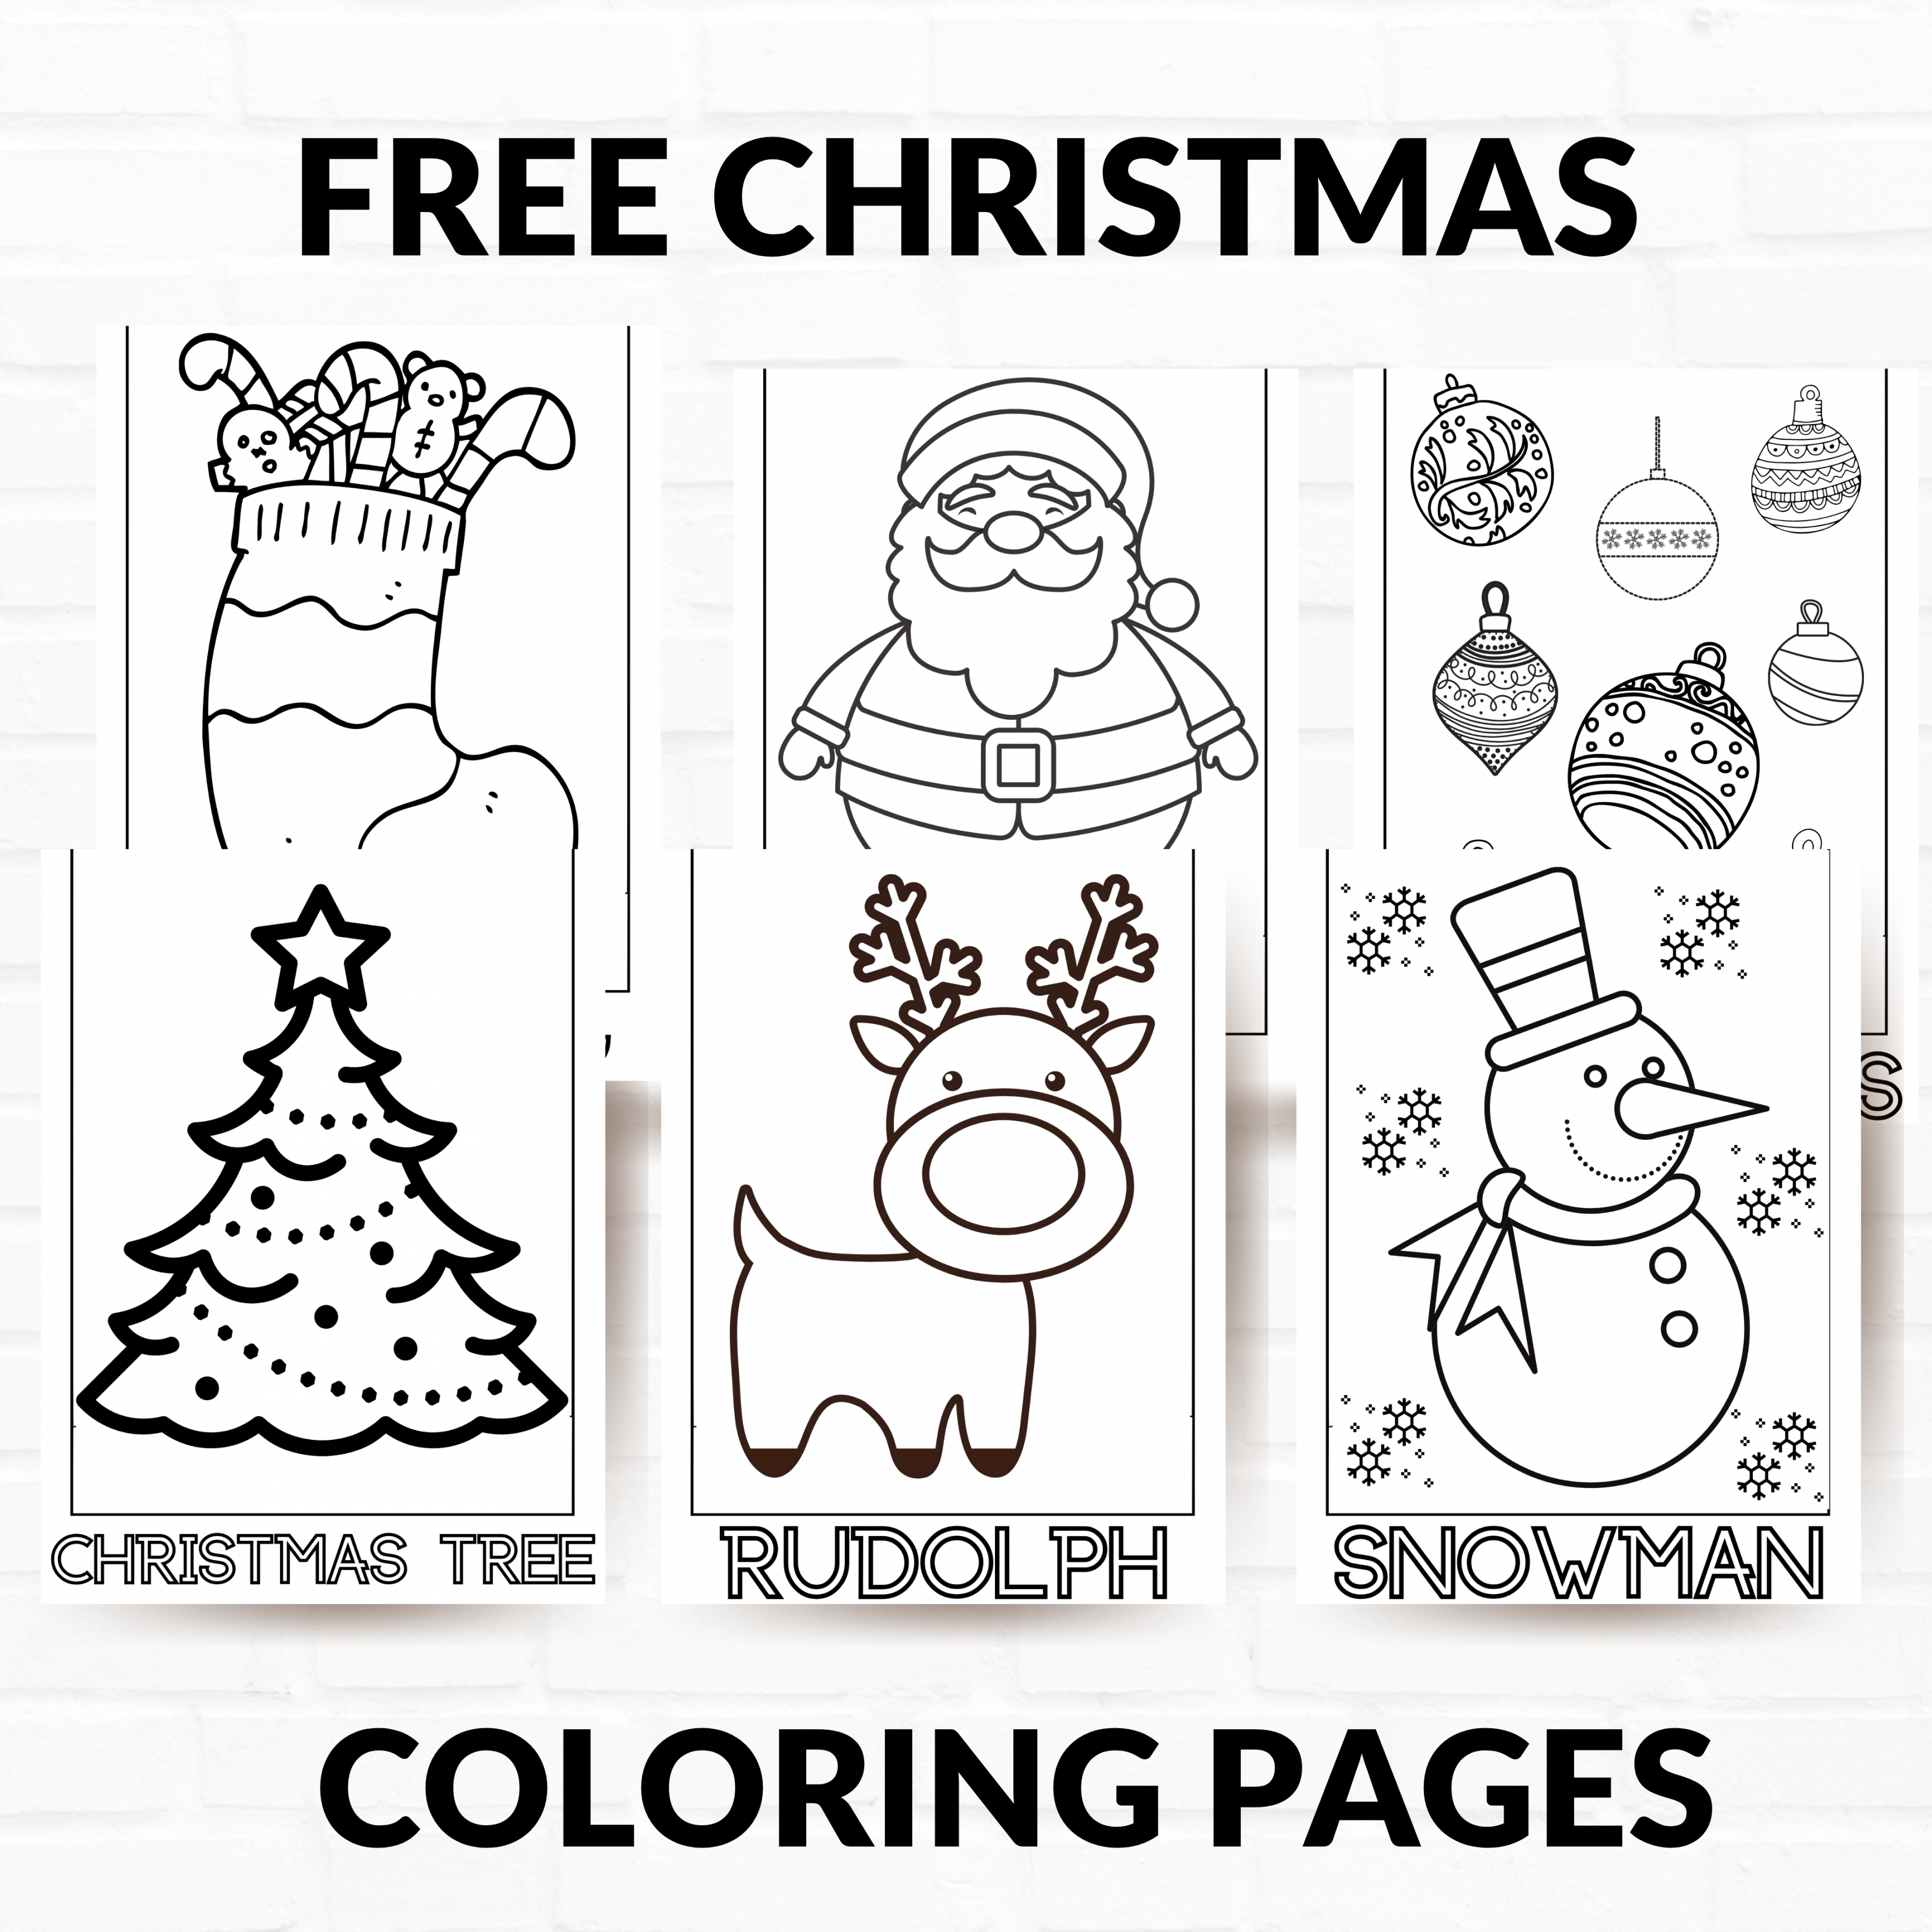 Free Printable Coloring Pages For Christmas - Printable - Free Printable Christmas Coloring Pages - About a Mom